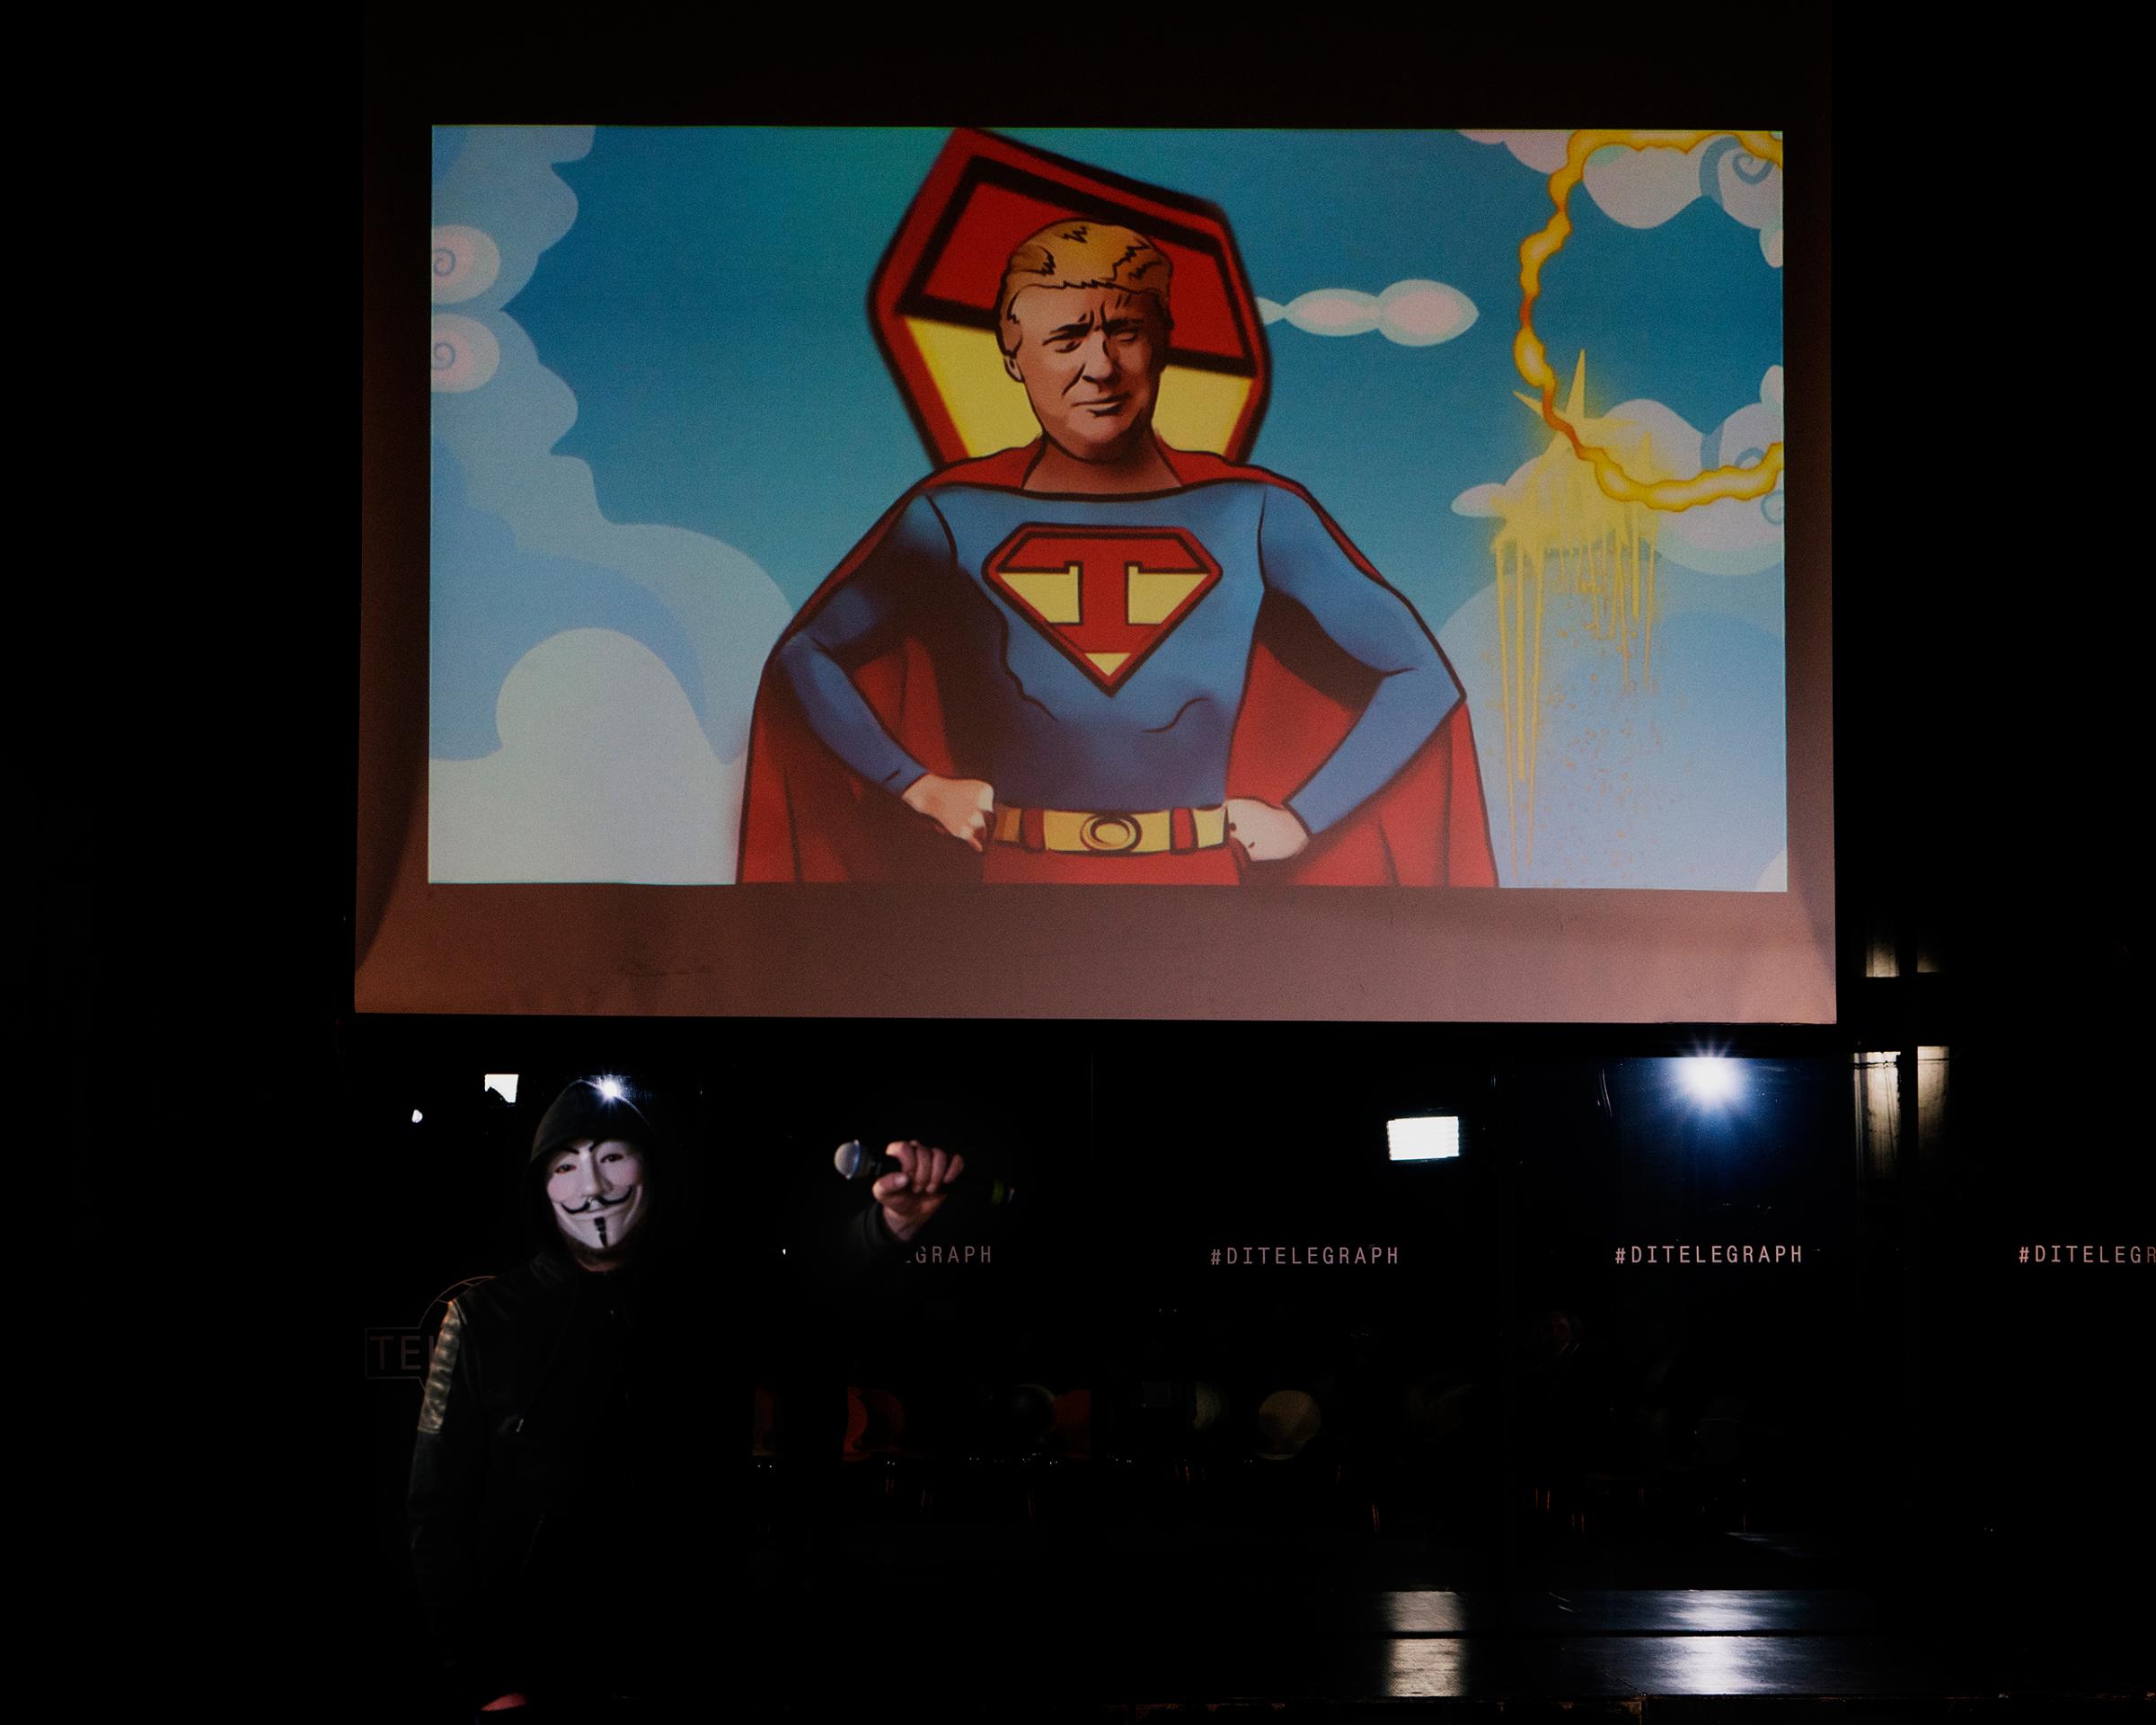 A drawing of Donald Trump is depicted on a Superman-like body on the occasion of his inauguration at an event organized by Maria Katasonova and TzarGrad TV in Moscow on Jan. 20, 2017. Katasonova was a candidate MP in the last Duma elections.